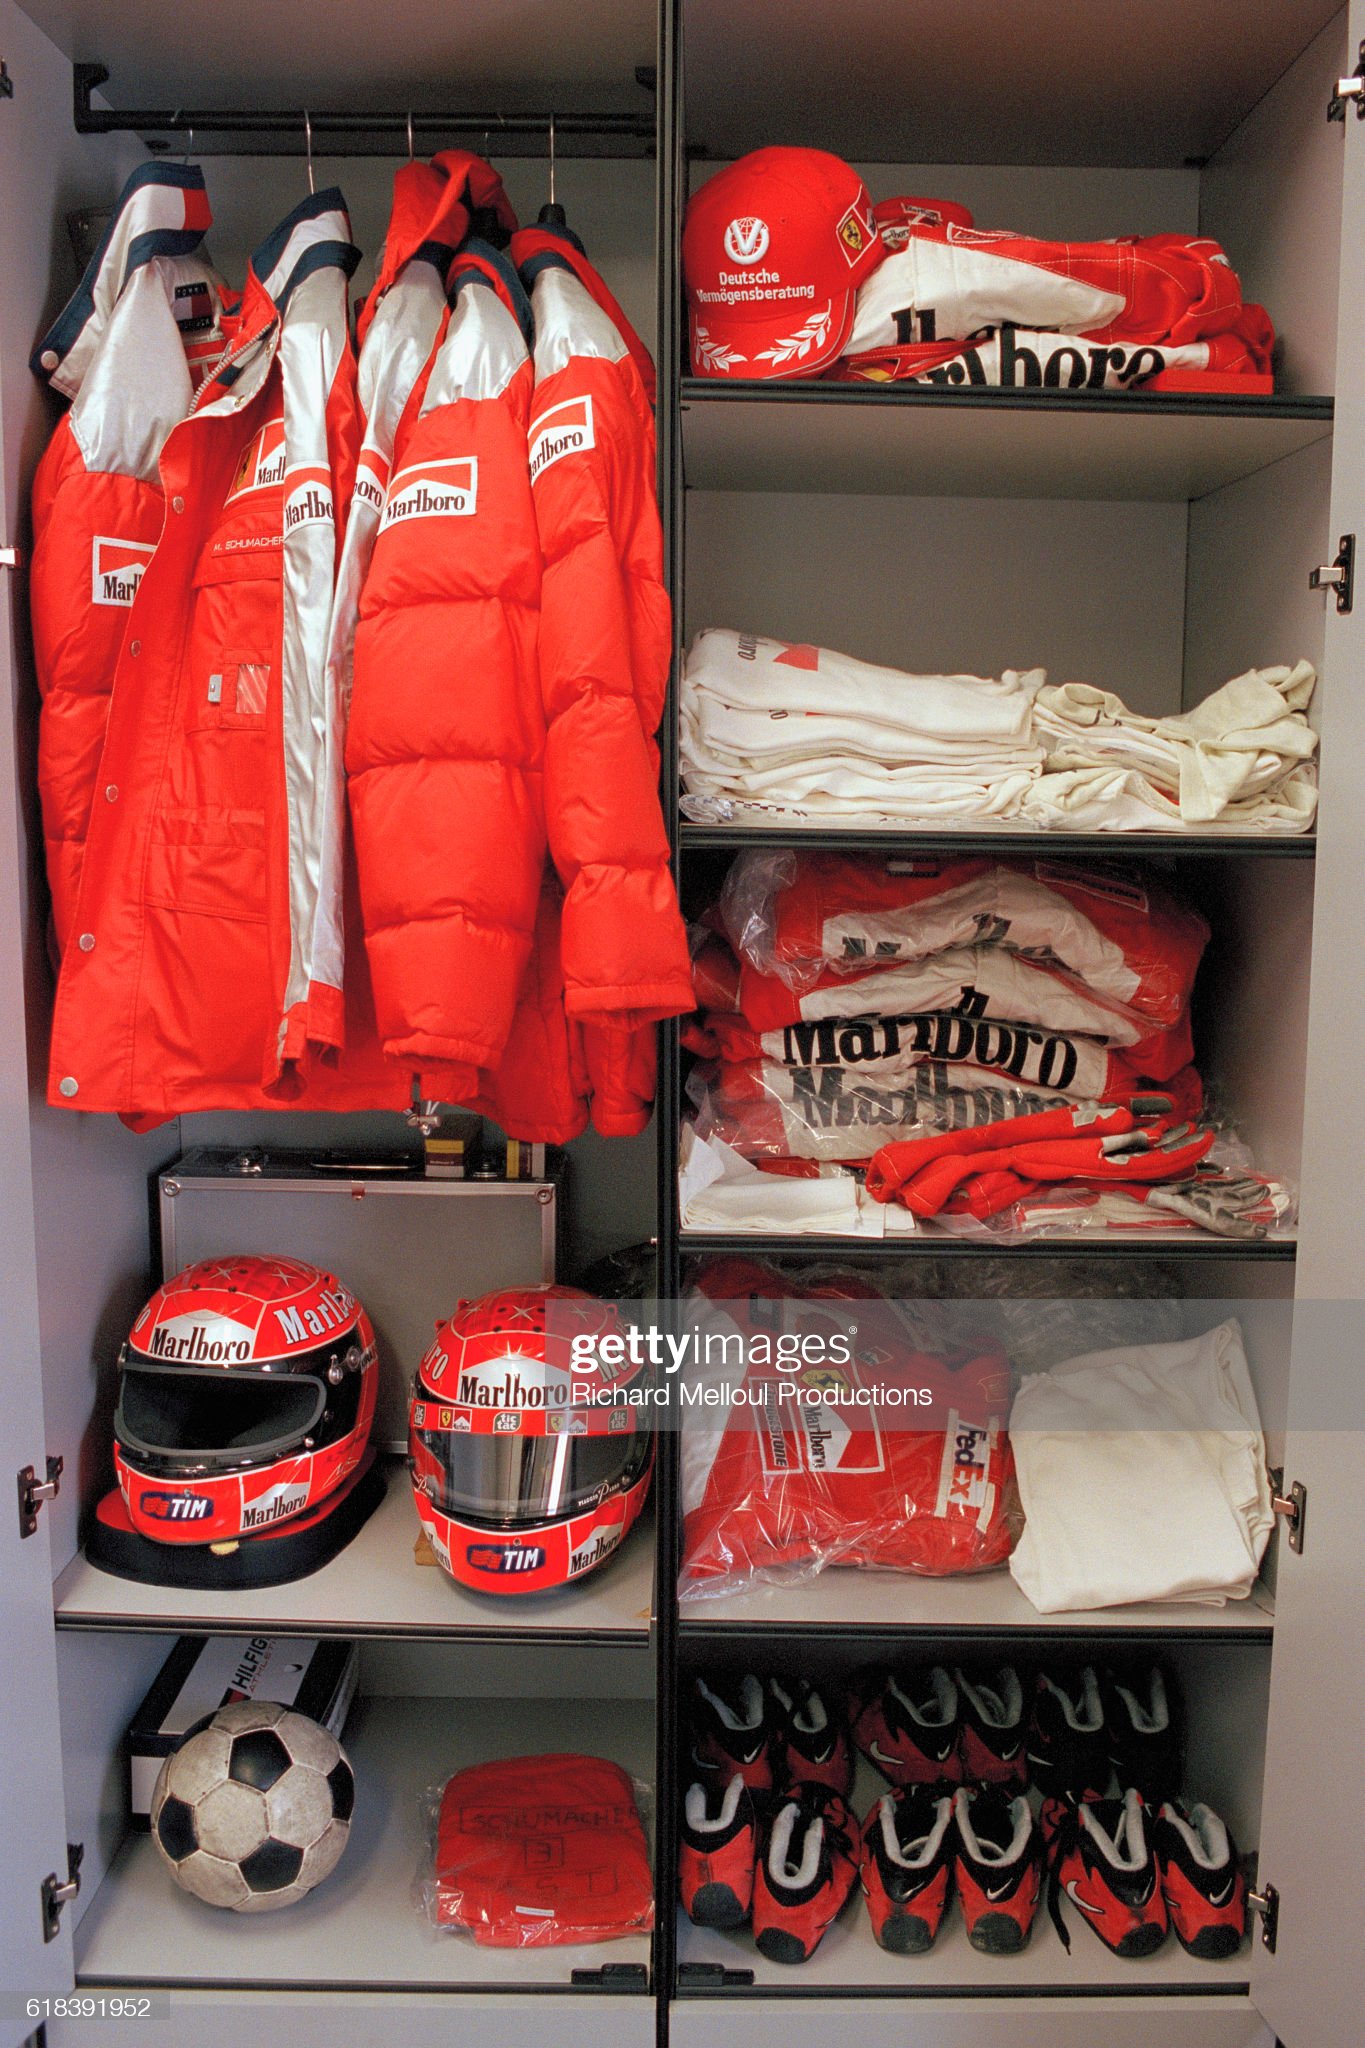 Ferrari Managing Director Jean Todt, not pictured, gives a guided tour behind the scenes at the Ferrari production factory in 2001. Race clothing belonging to Michael Schumacher. 